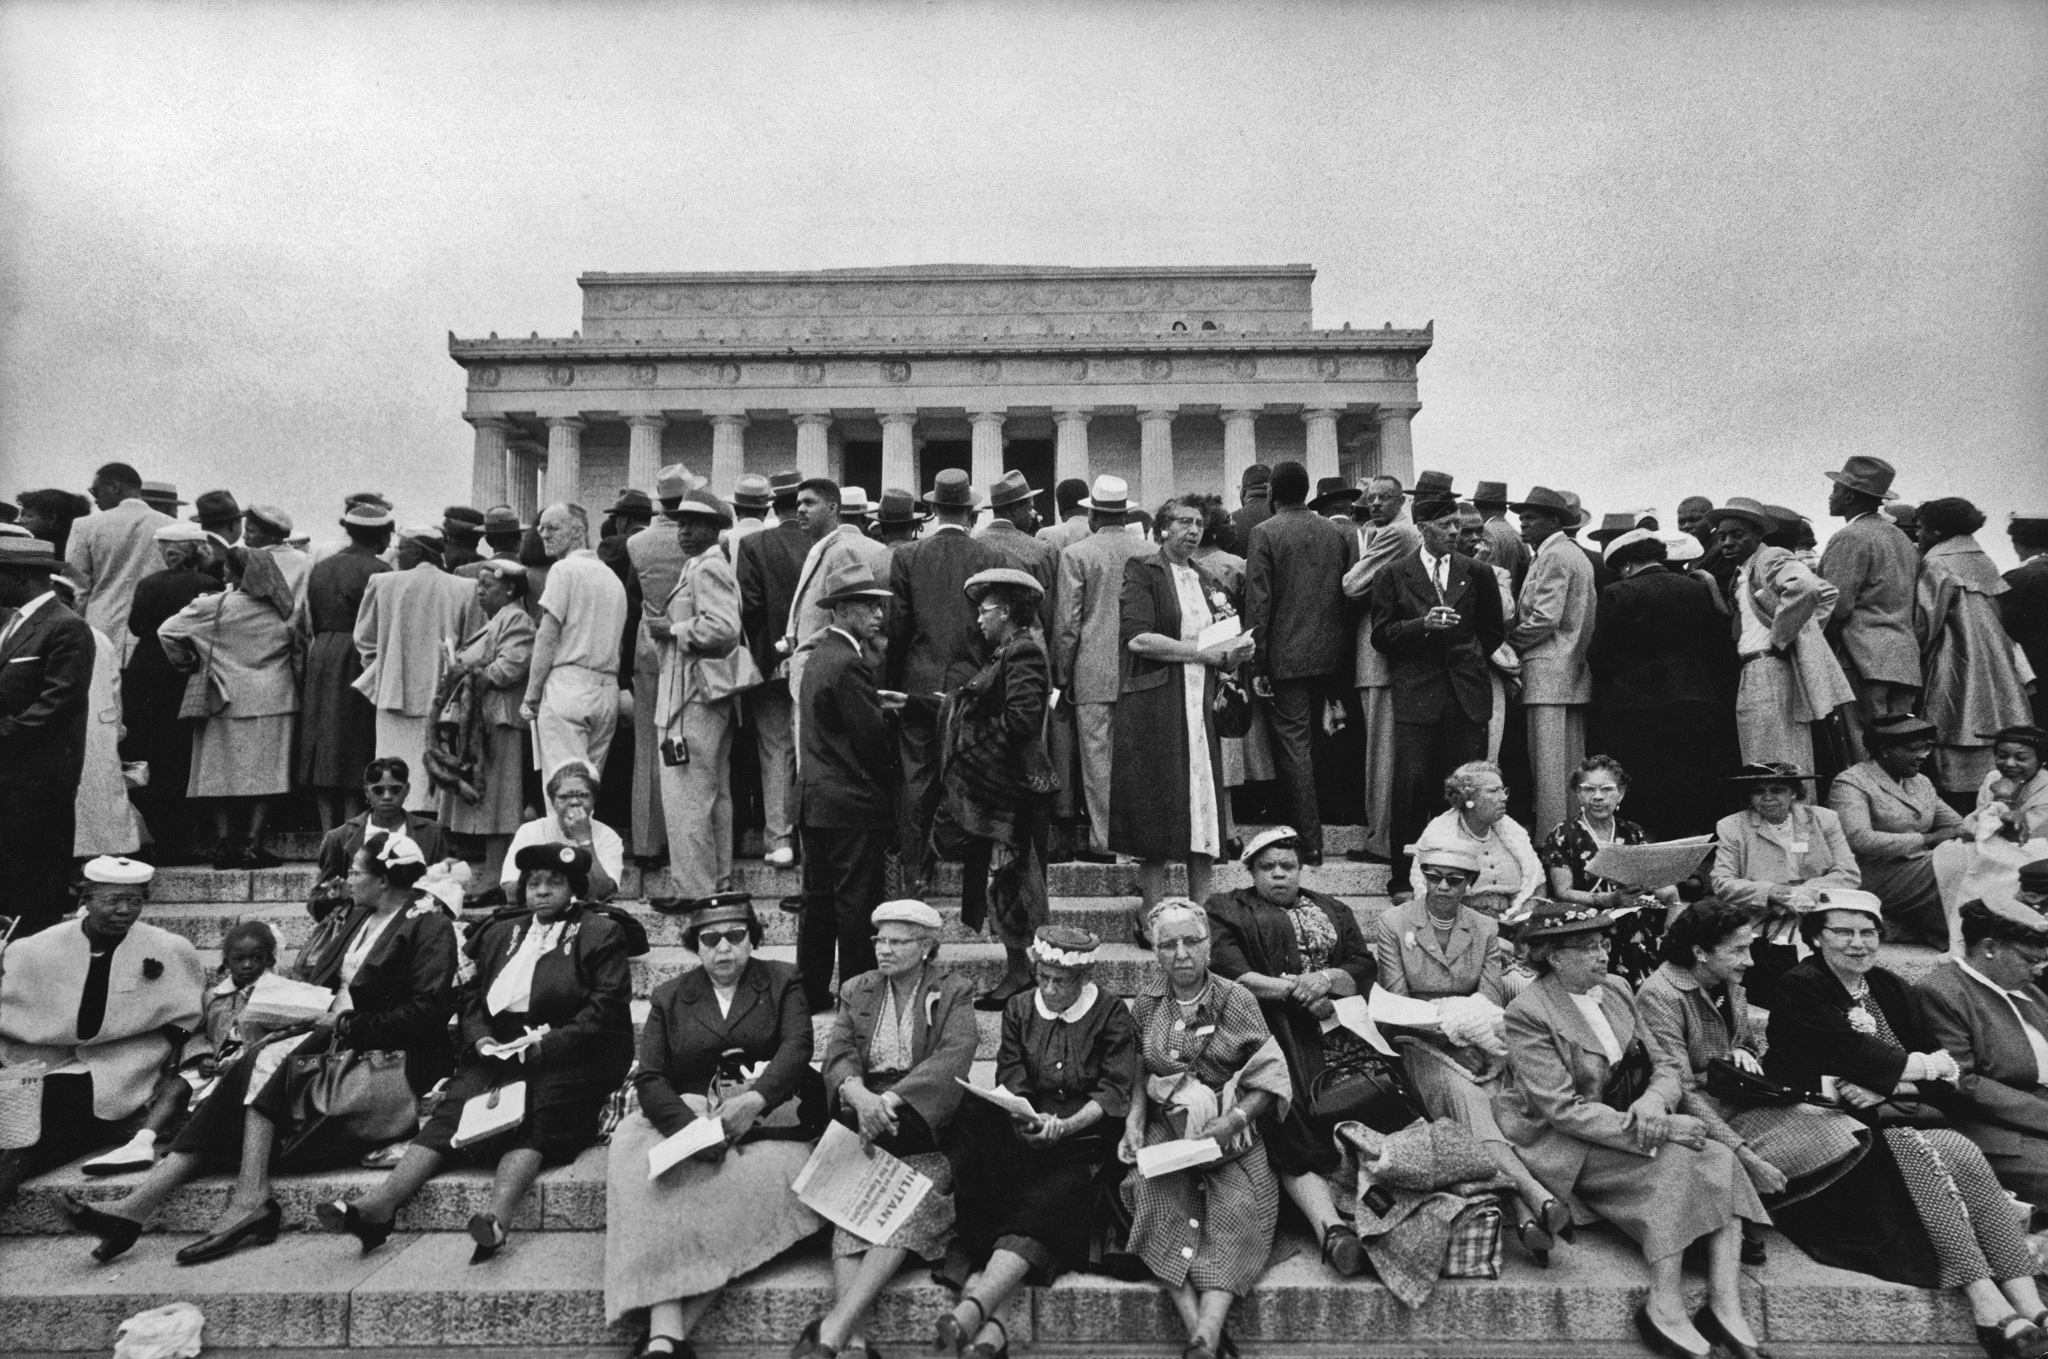 Demonstrators at a rallying point for the Prayer Pilgrimage for Freedom, May 17, 1957, Washington. D.C., held in support of desegregation.